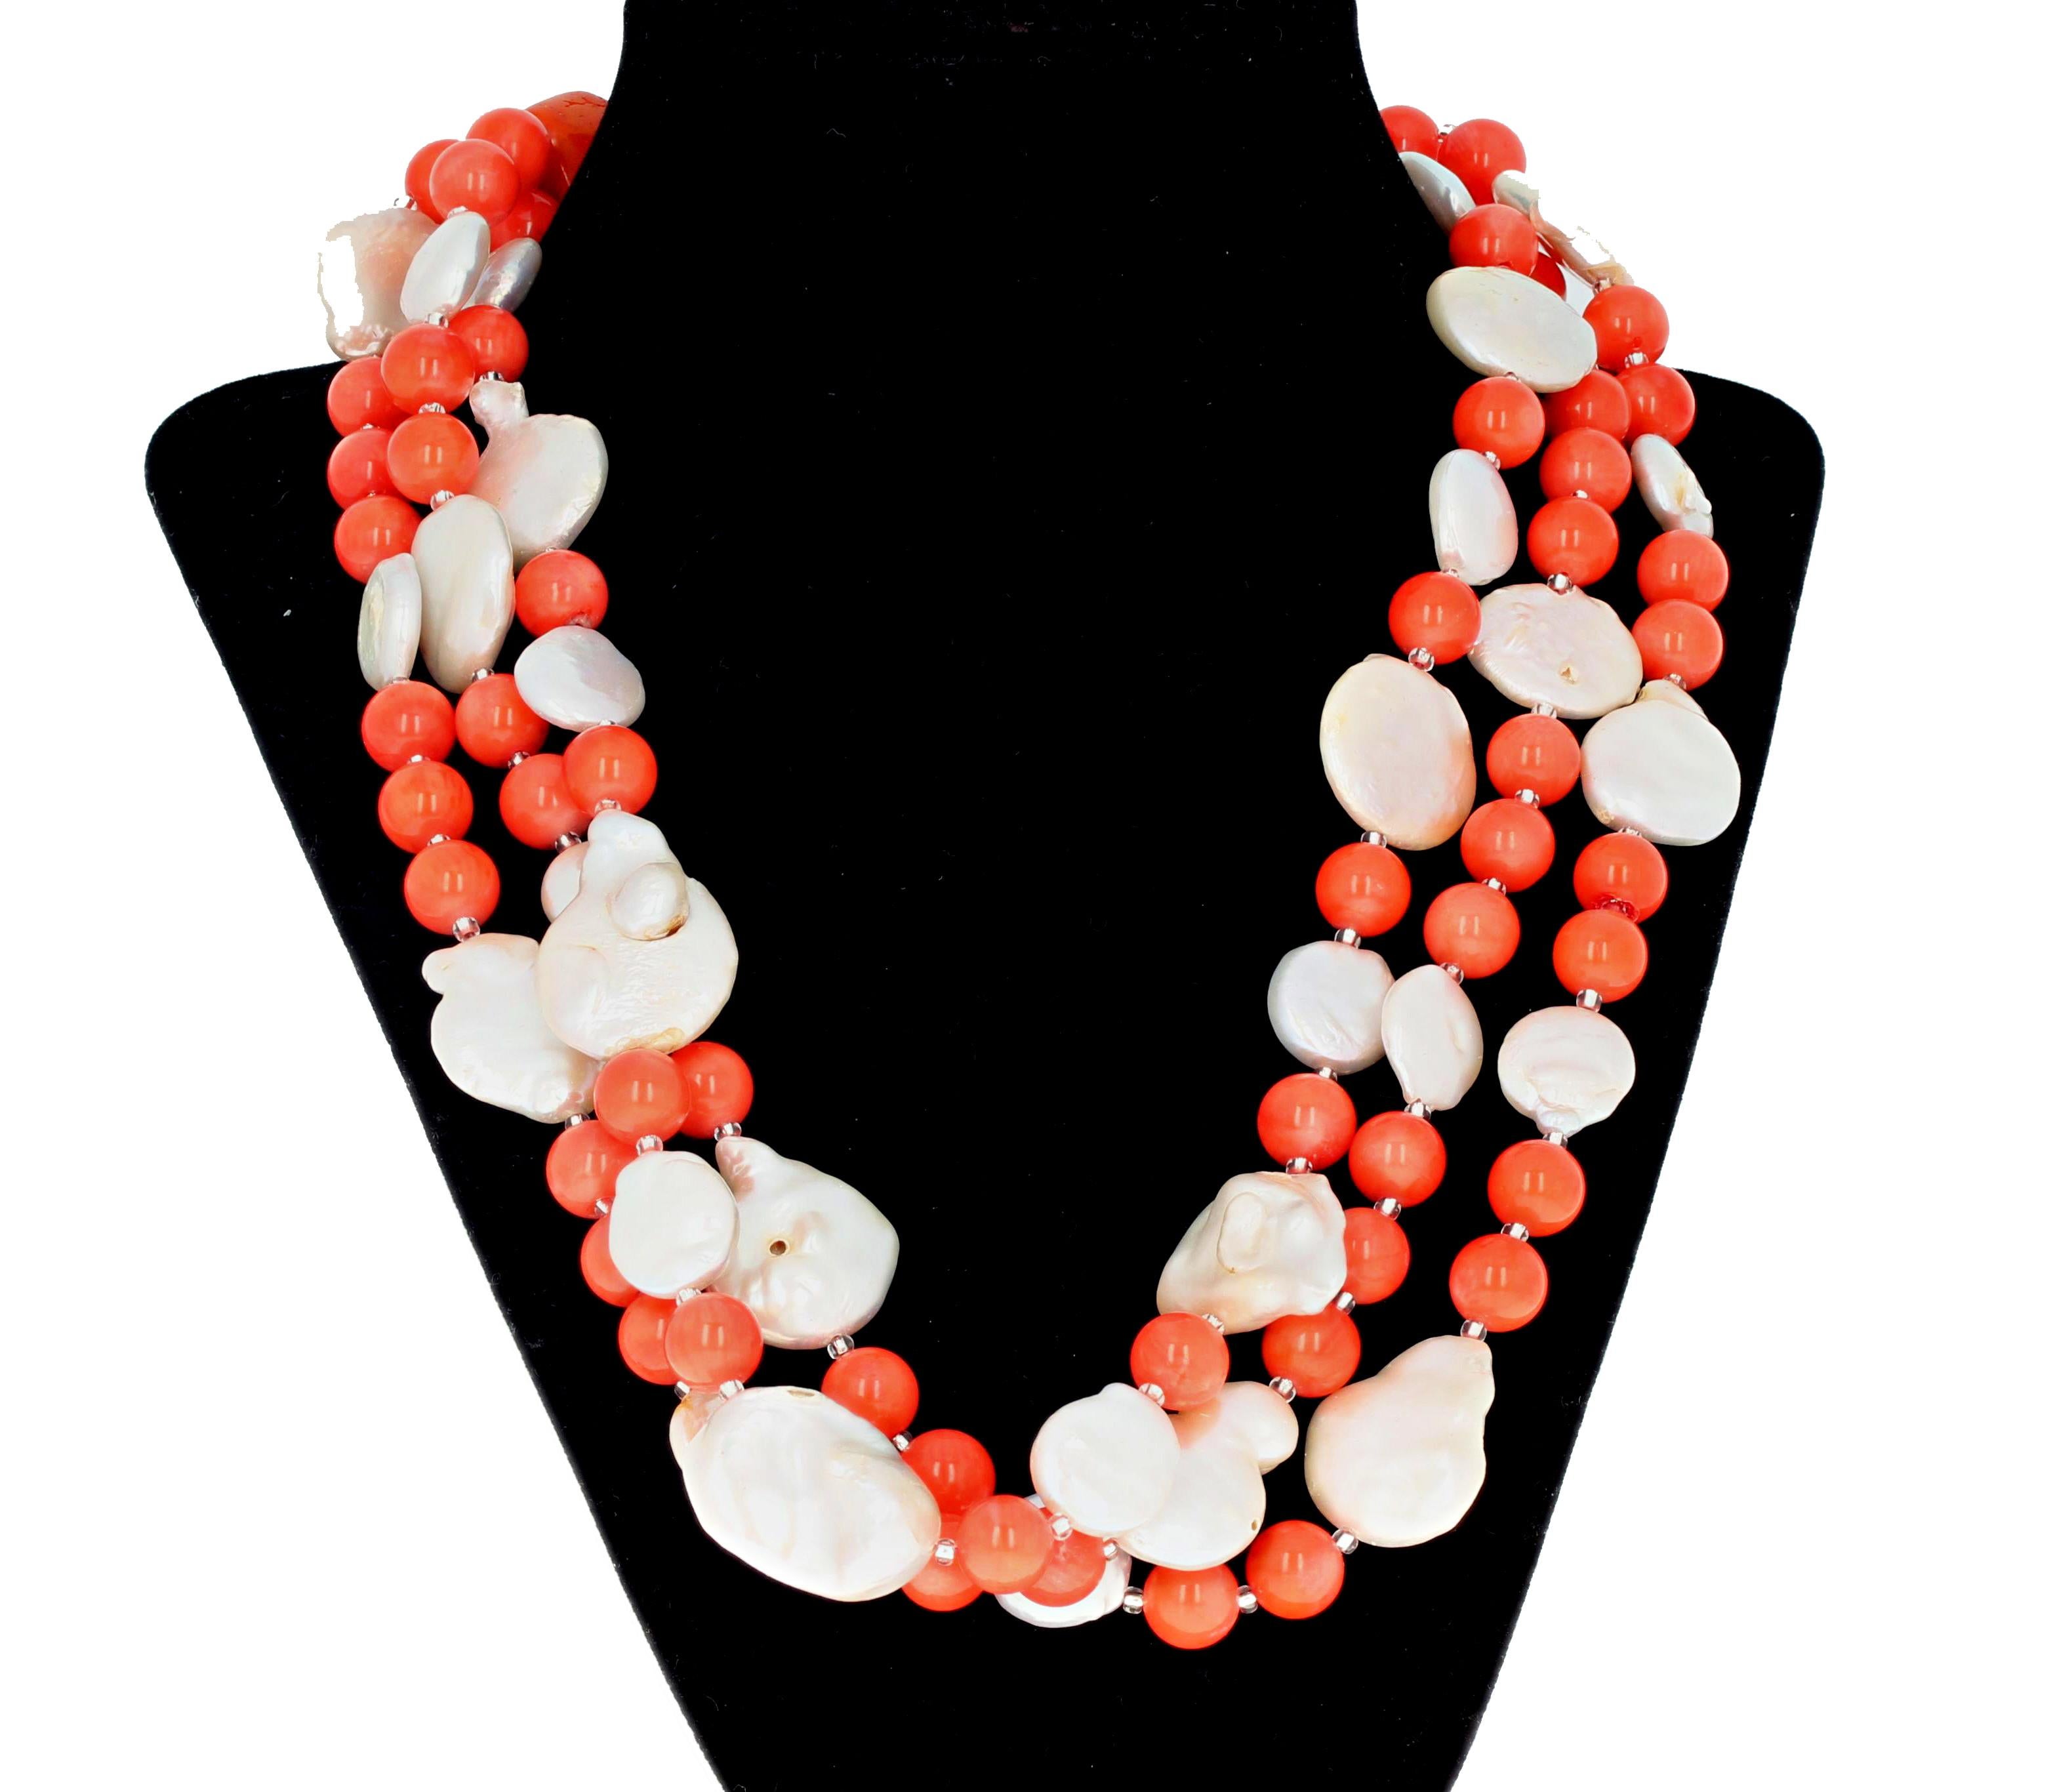 Women's or Men's AJD Superbly Dramatic Orange Coral & Coin Pearls Triple Strand 20